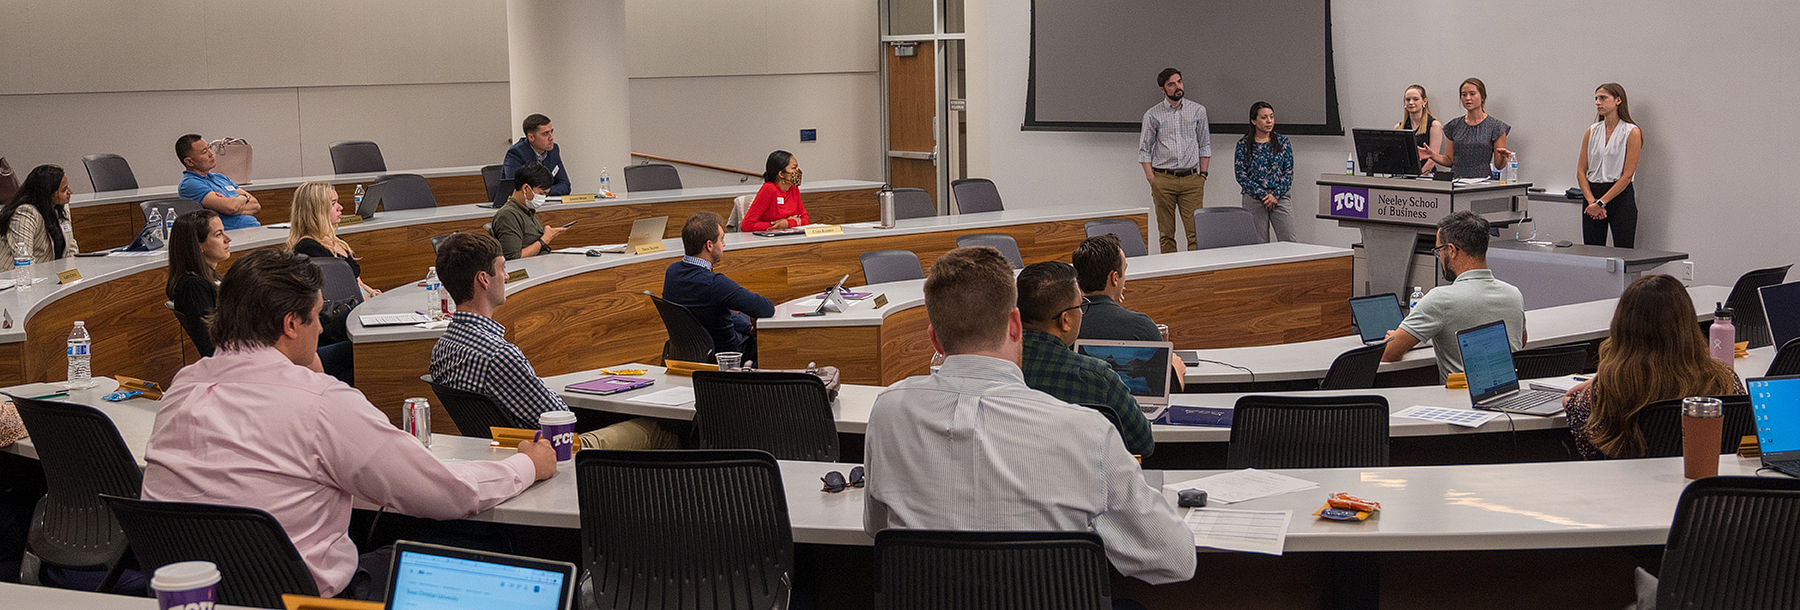 Section Image: Students giving a presentation in Neeley 1201 